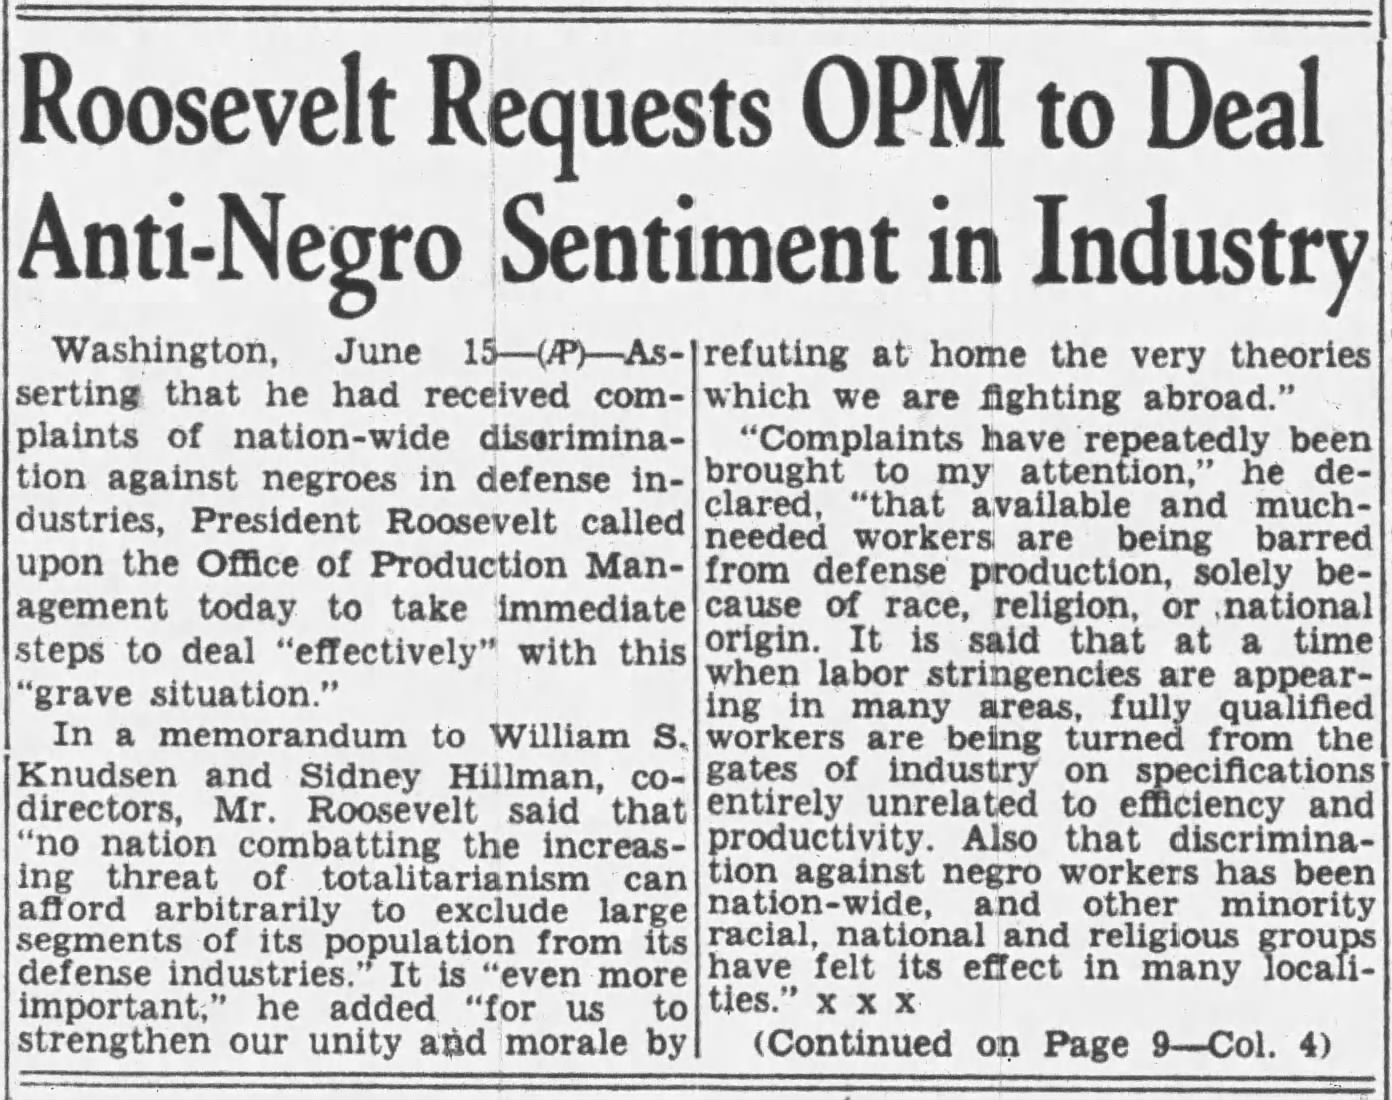 Roosevelt Requests OPM to Deal Anti-Negro Sentiment in Industry